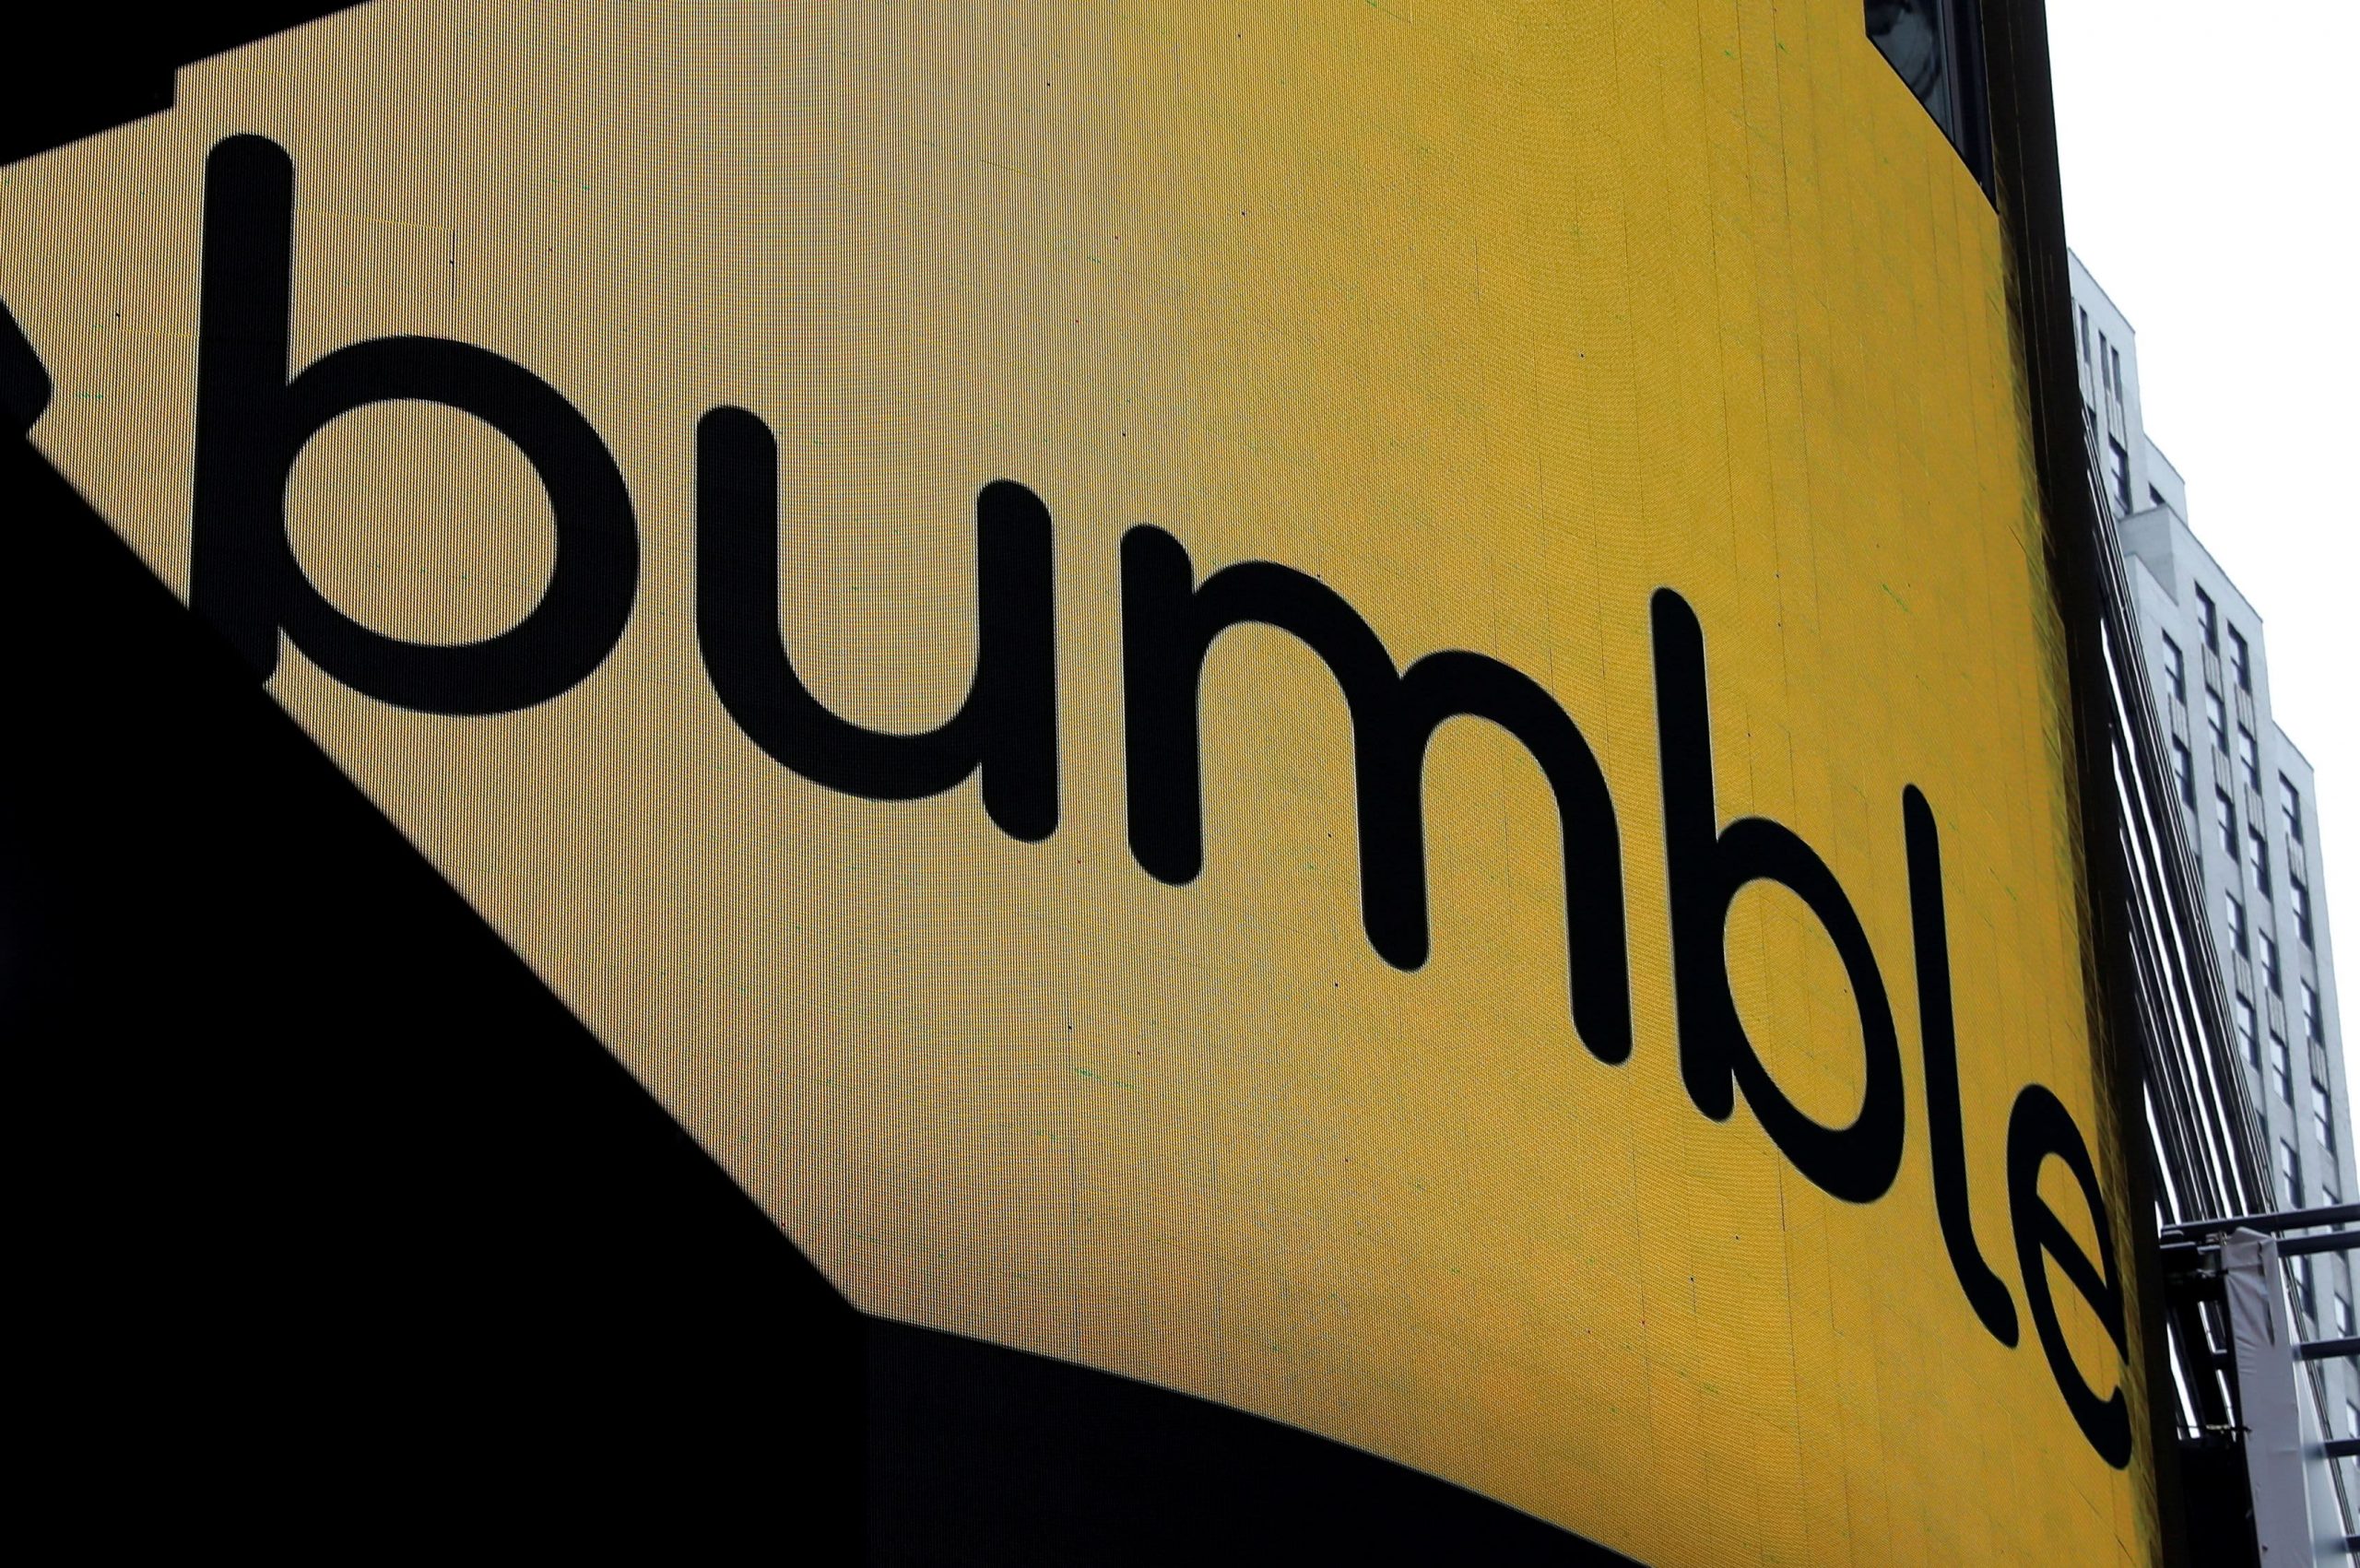 Jim Cramer recommends relationship app rivals Bumble and Match Group